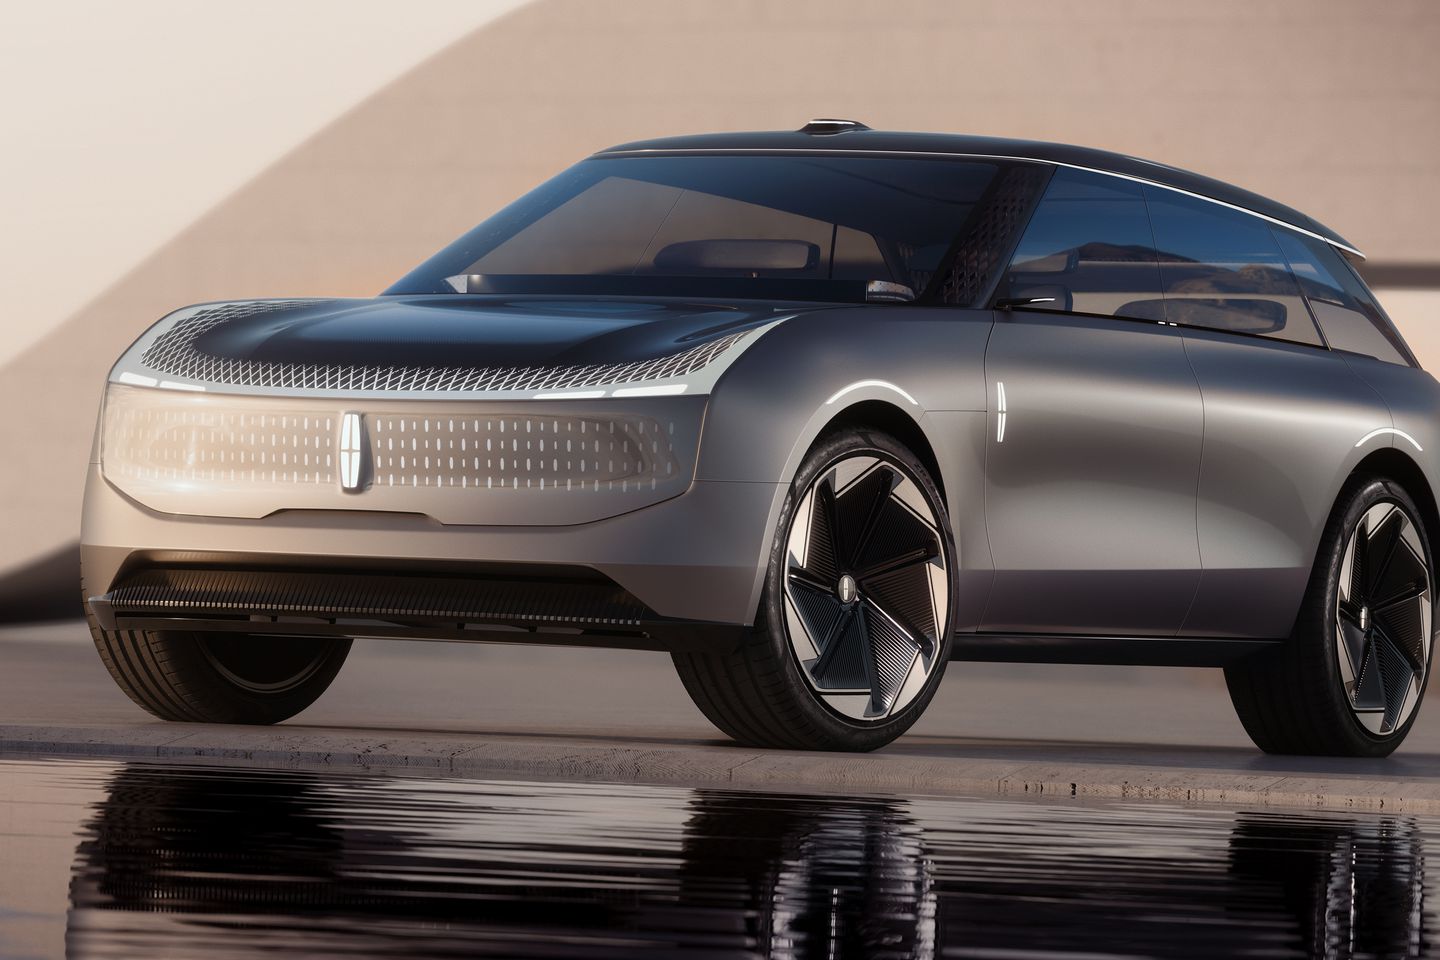 Lincoln’s new electric concept car uses lofi beats and ‘fragrances’ to